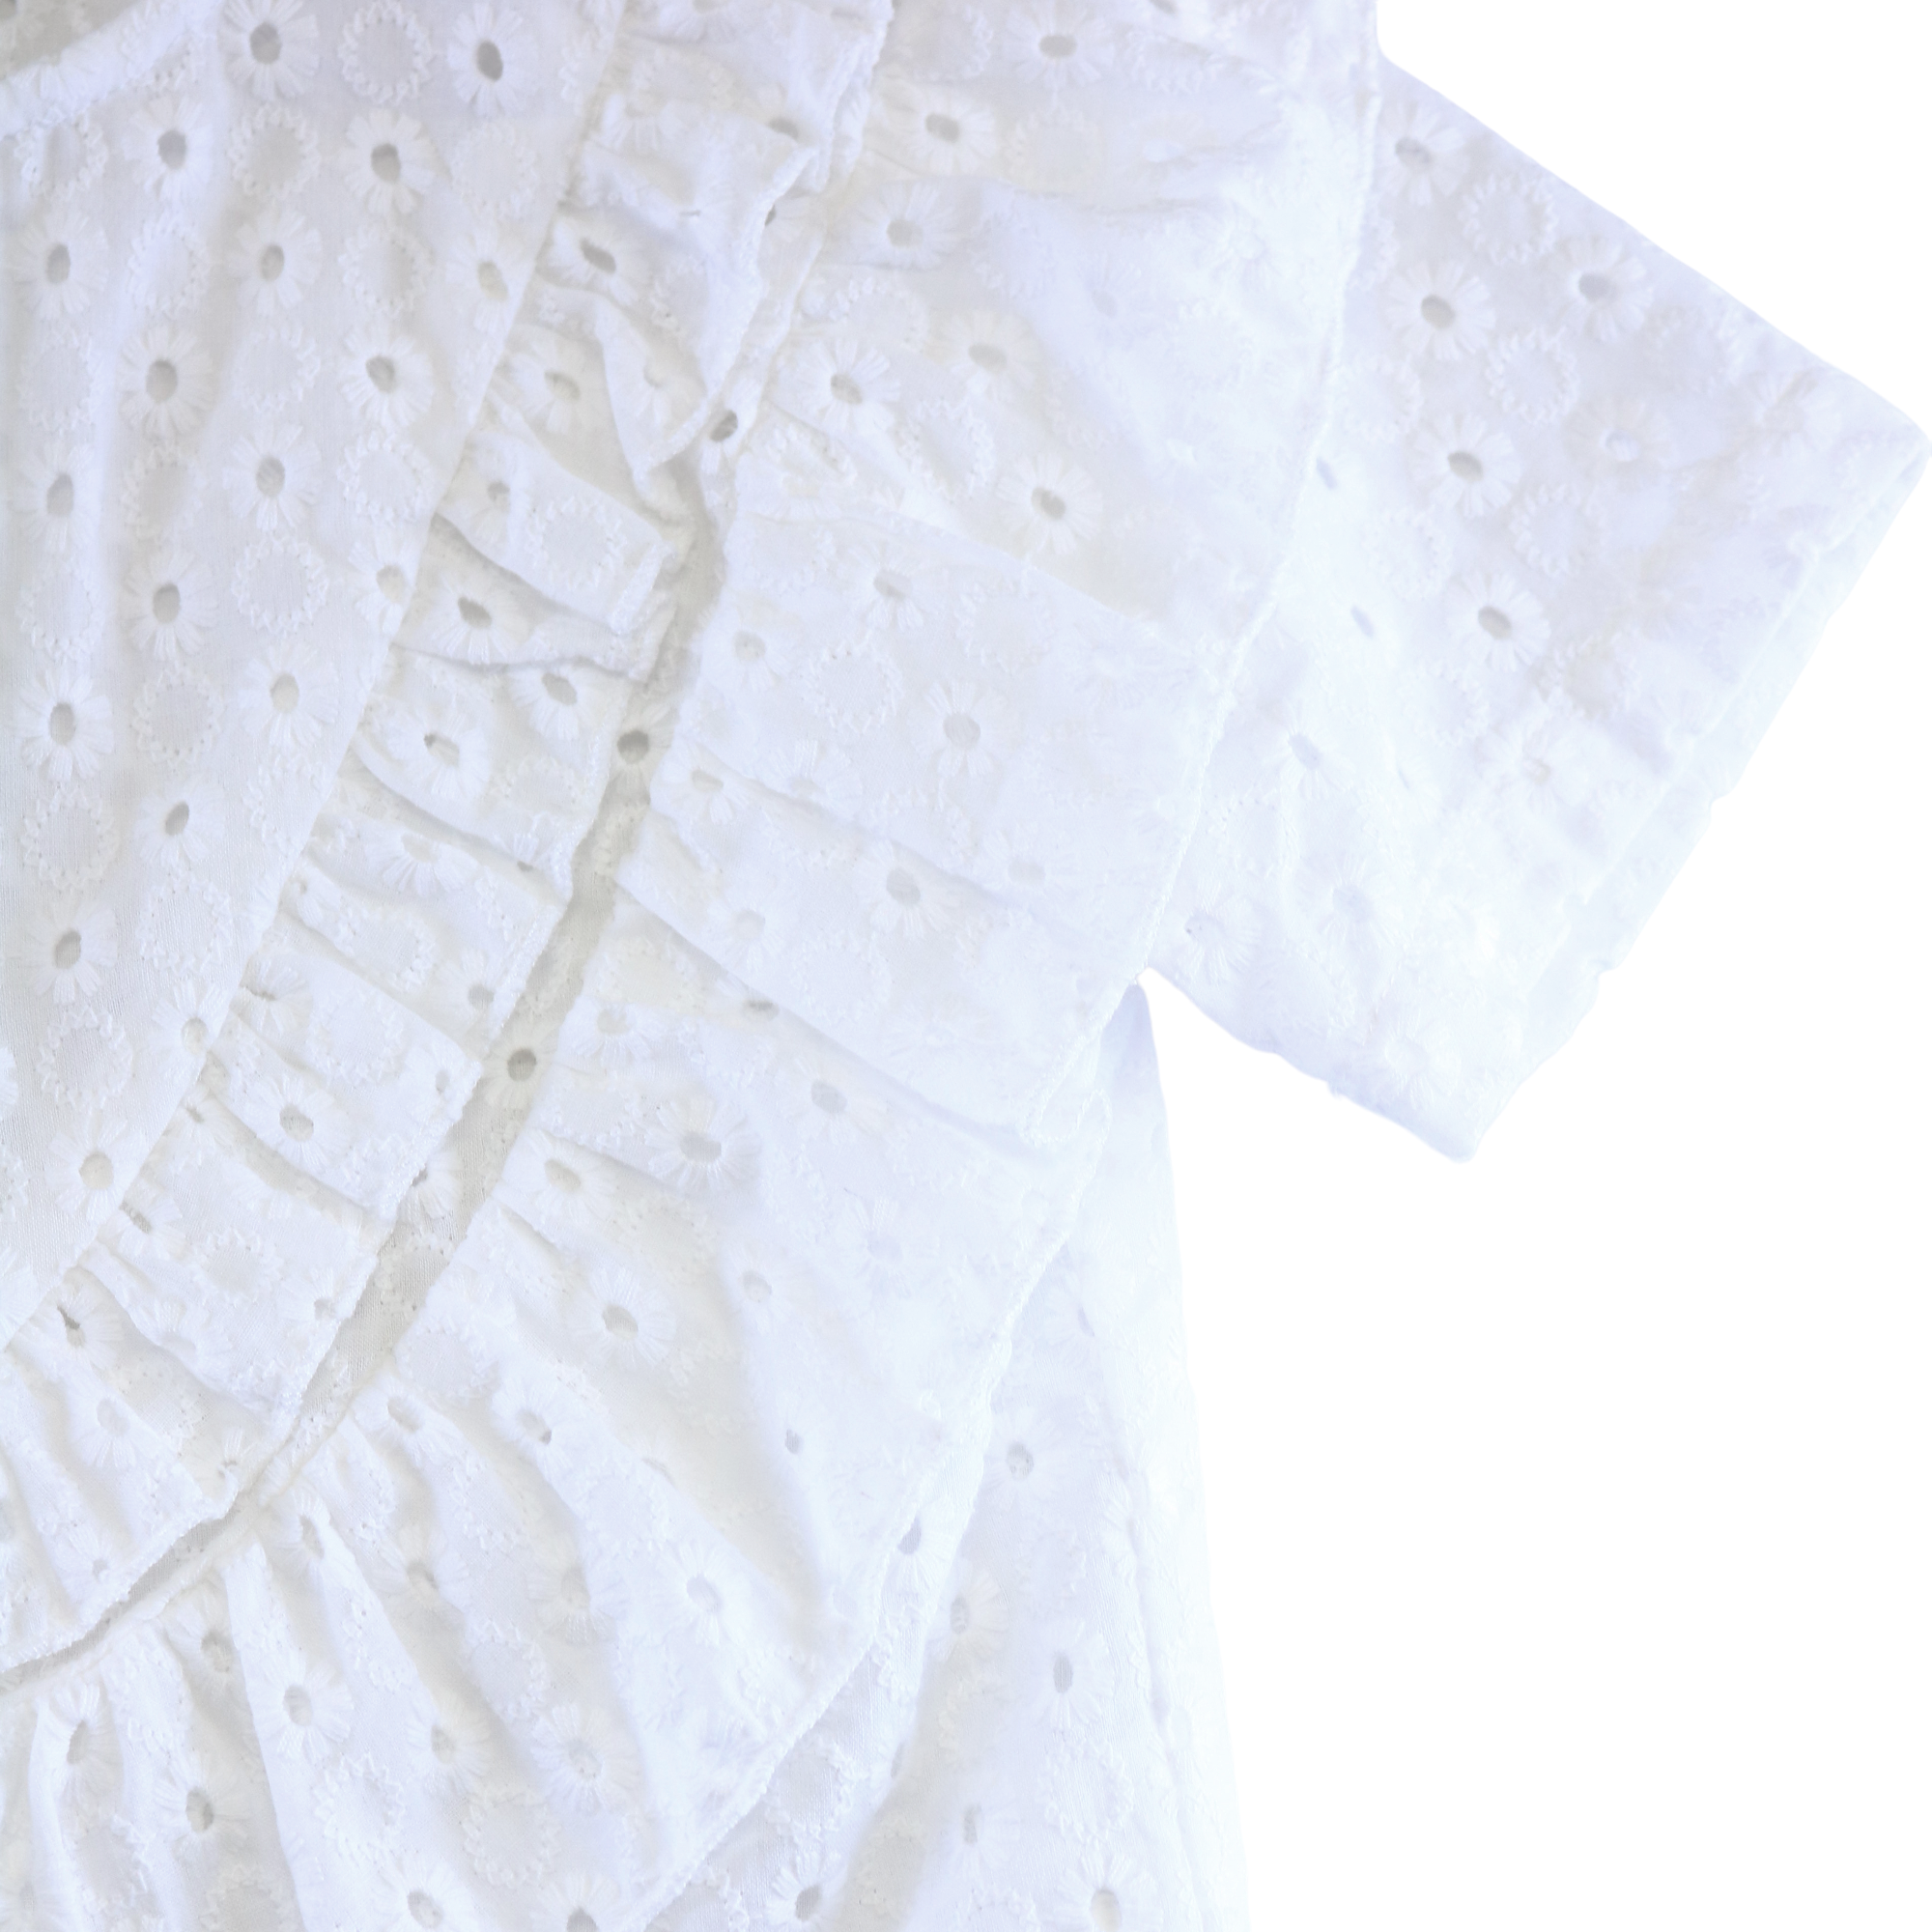 Floral Eyelet Fabric Top - White